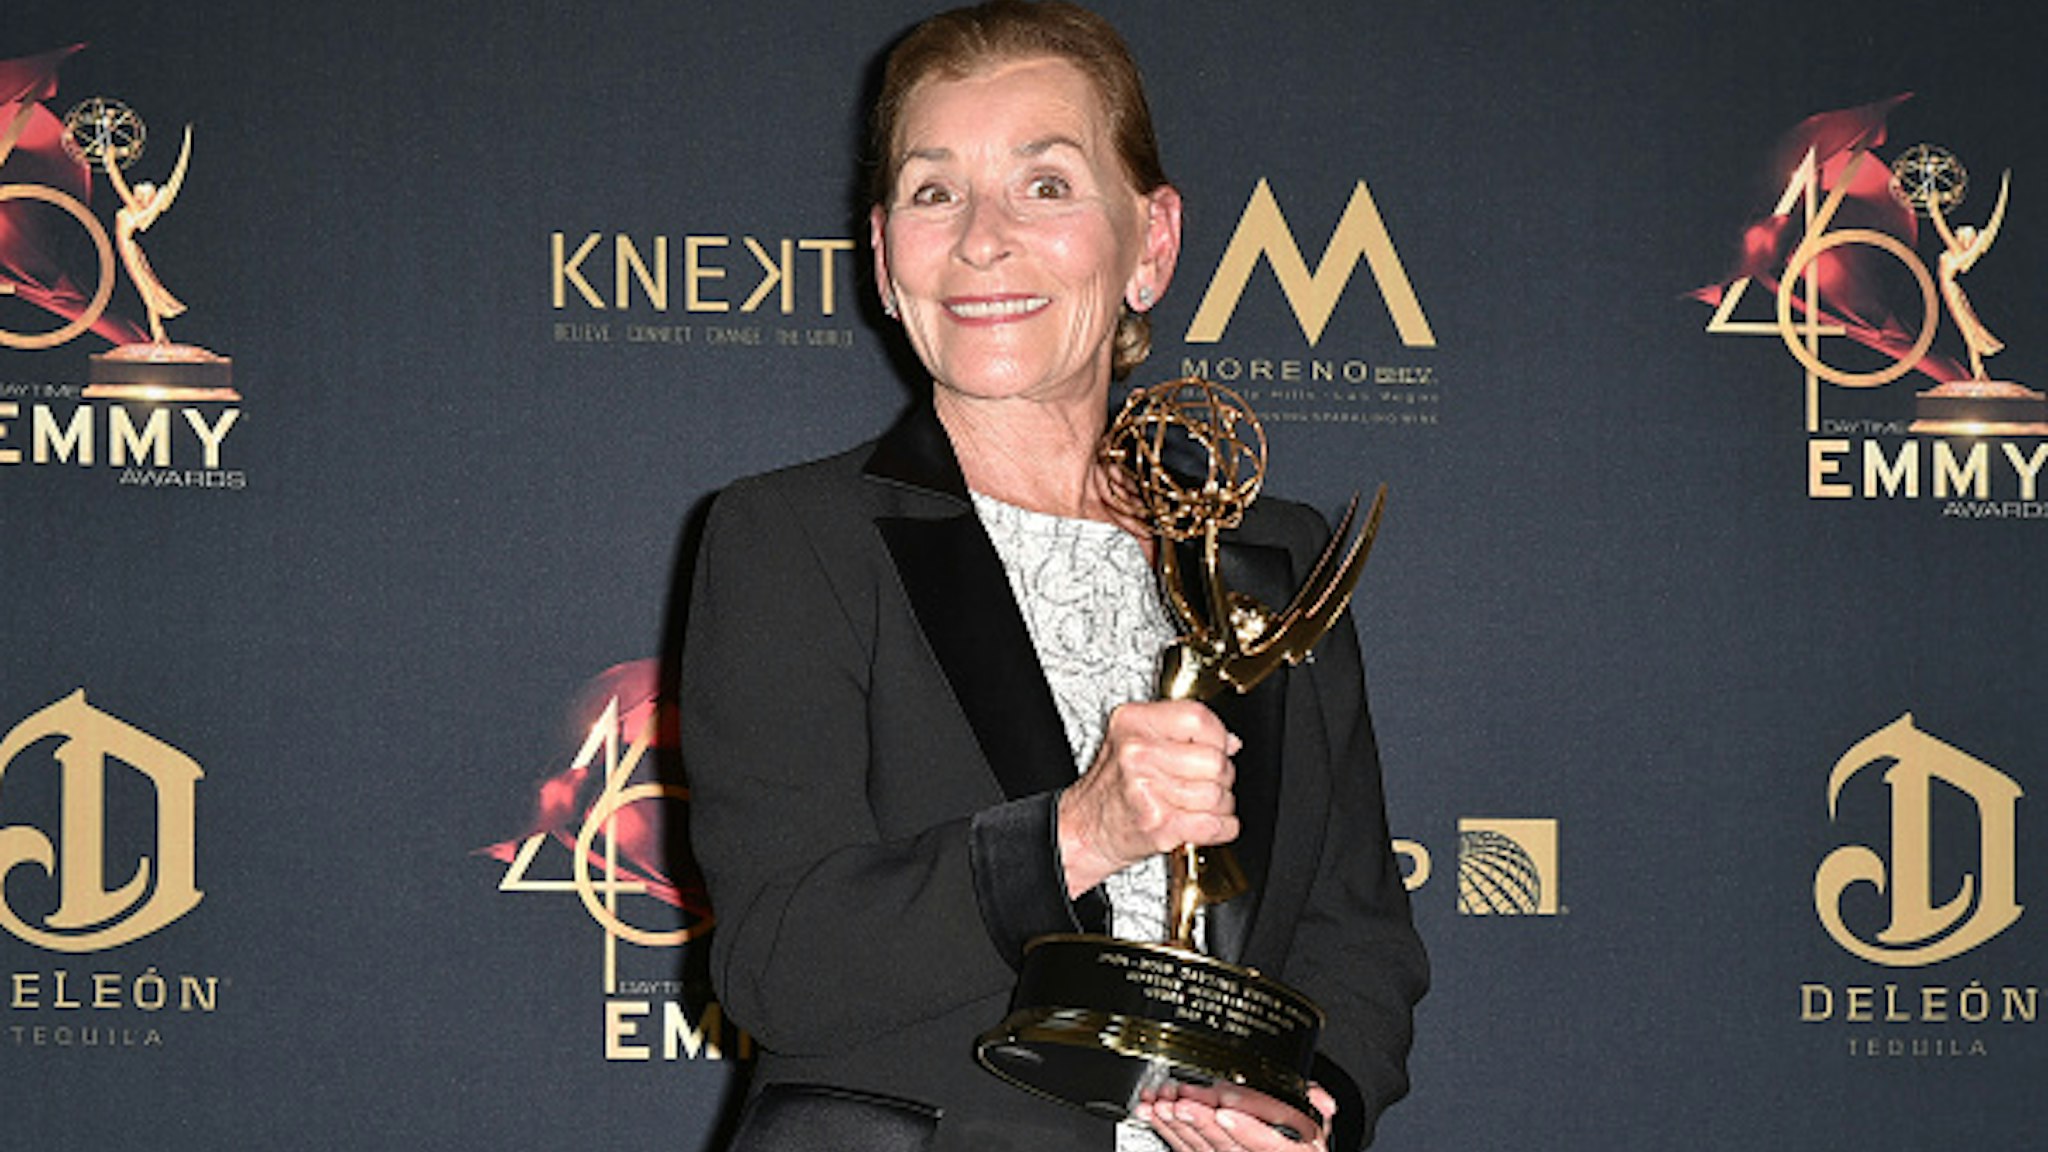 PASADENA, CALIFORNIA - MAY 05: Judge Judy Sheindlin, with her Lifetime Achievement Award, attends the 46th Annual Daytime Emmy Awards - Press Room at Pasadena Civic Center on May 05, 2019 in Pasadena, California.